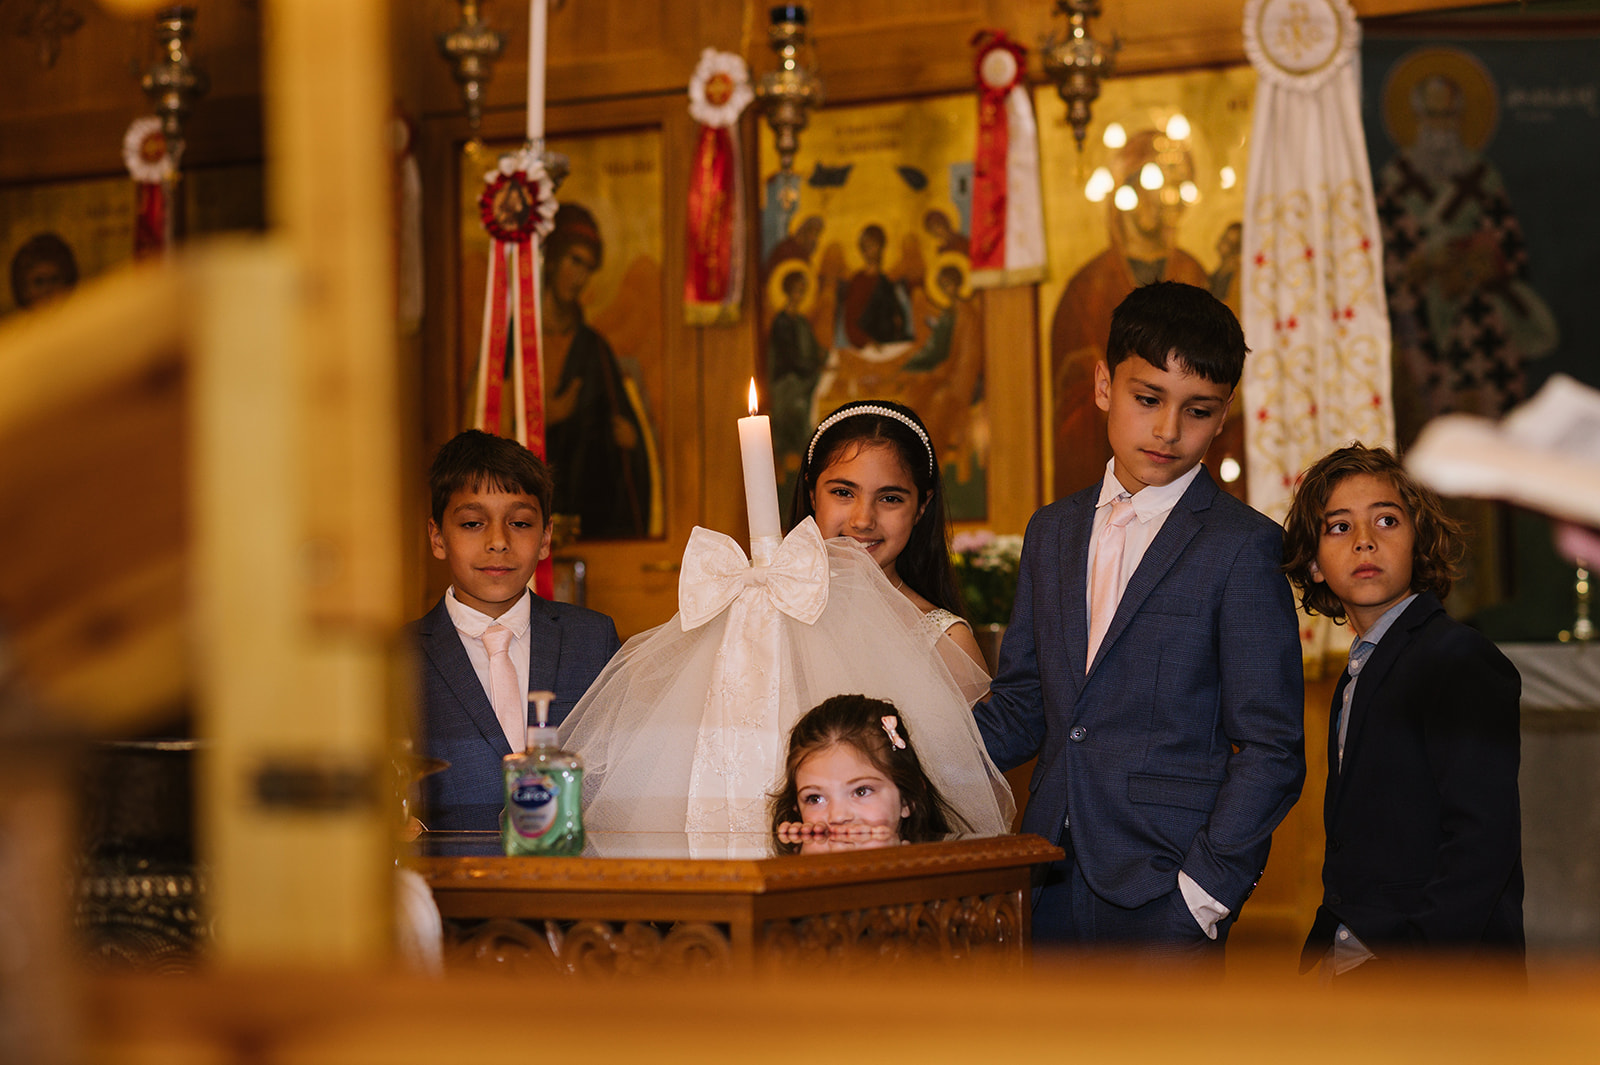 Children help in the ceremony at a greek orthodox christening